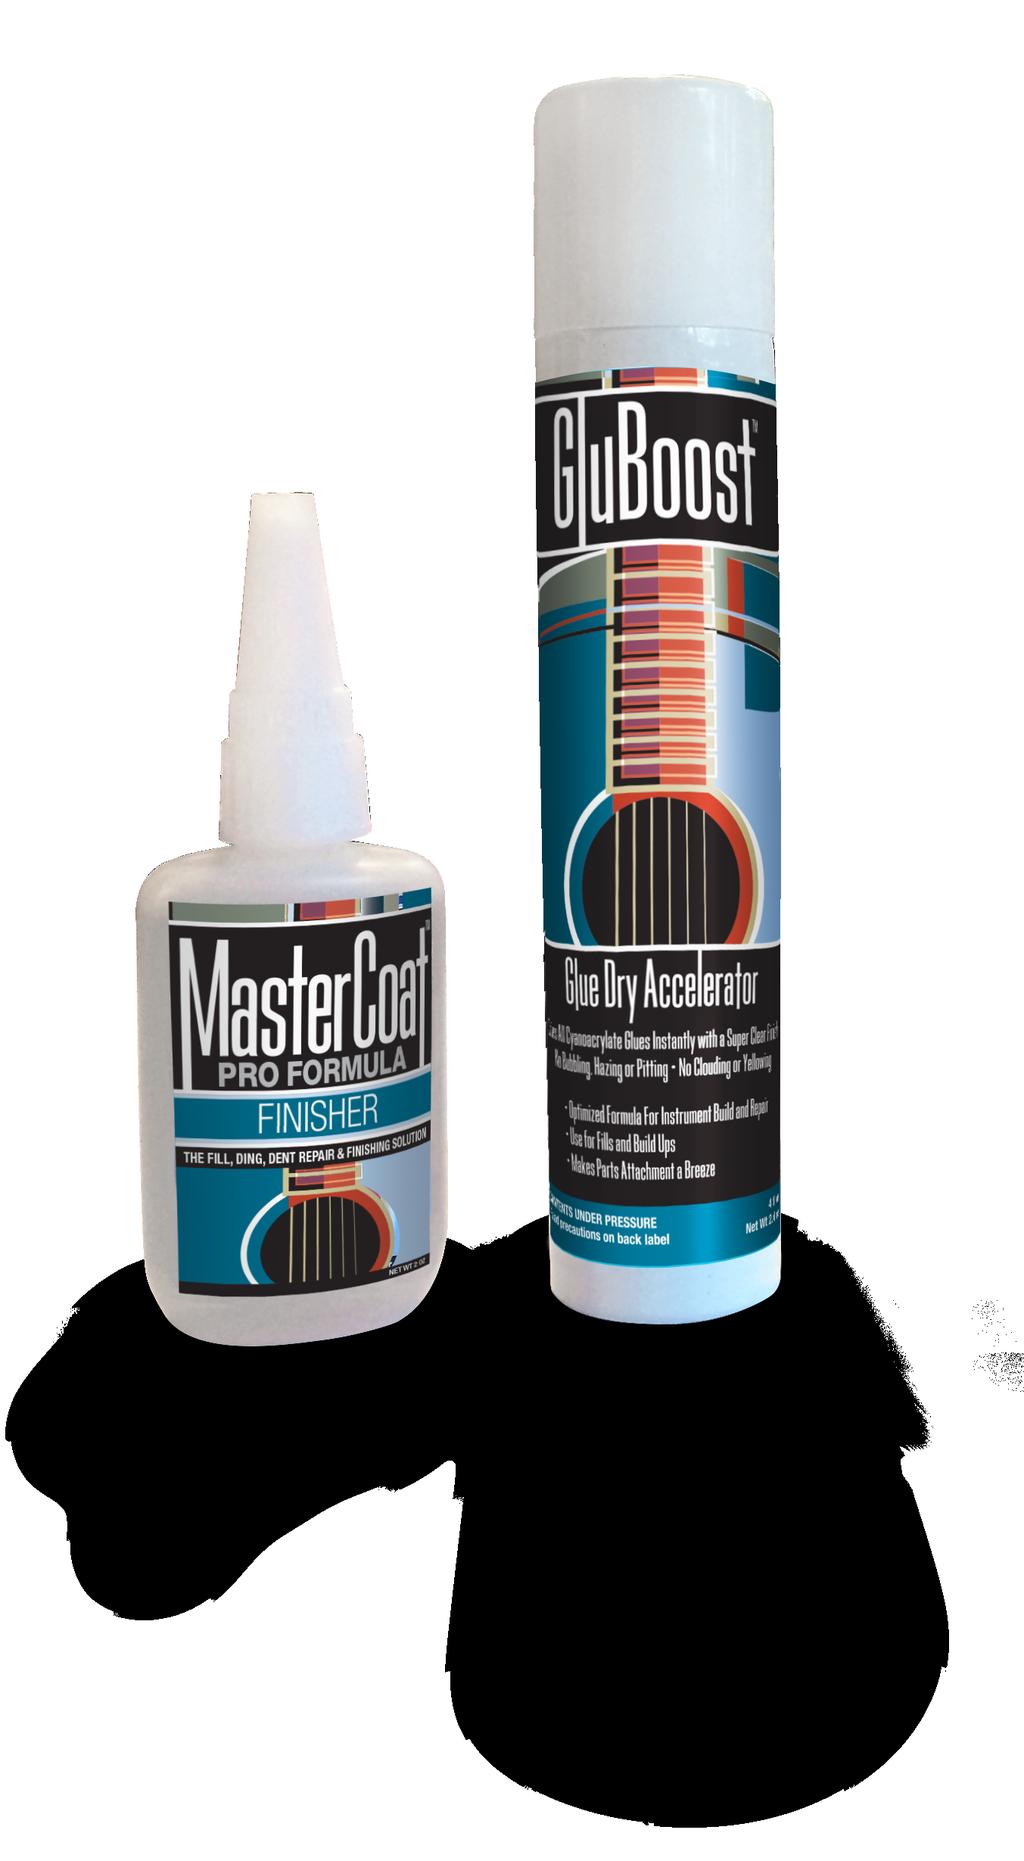 For on the spot drop fills and effective repair of dings and dents: 1. Prepare area as you normally would* 2. Spray with GluBoost into the ding or dent before applying MasterCoat 3.